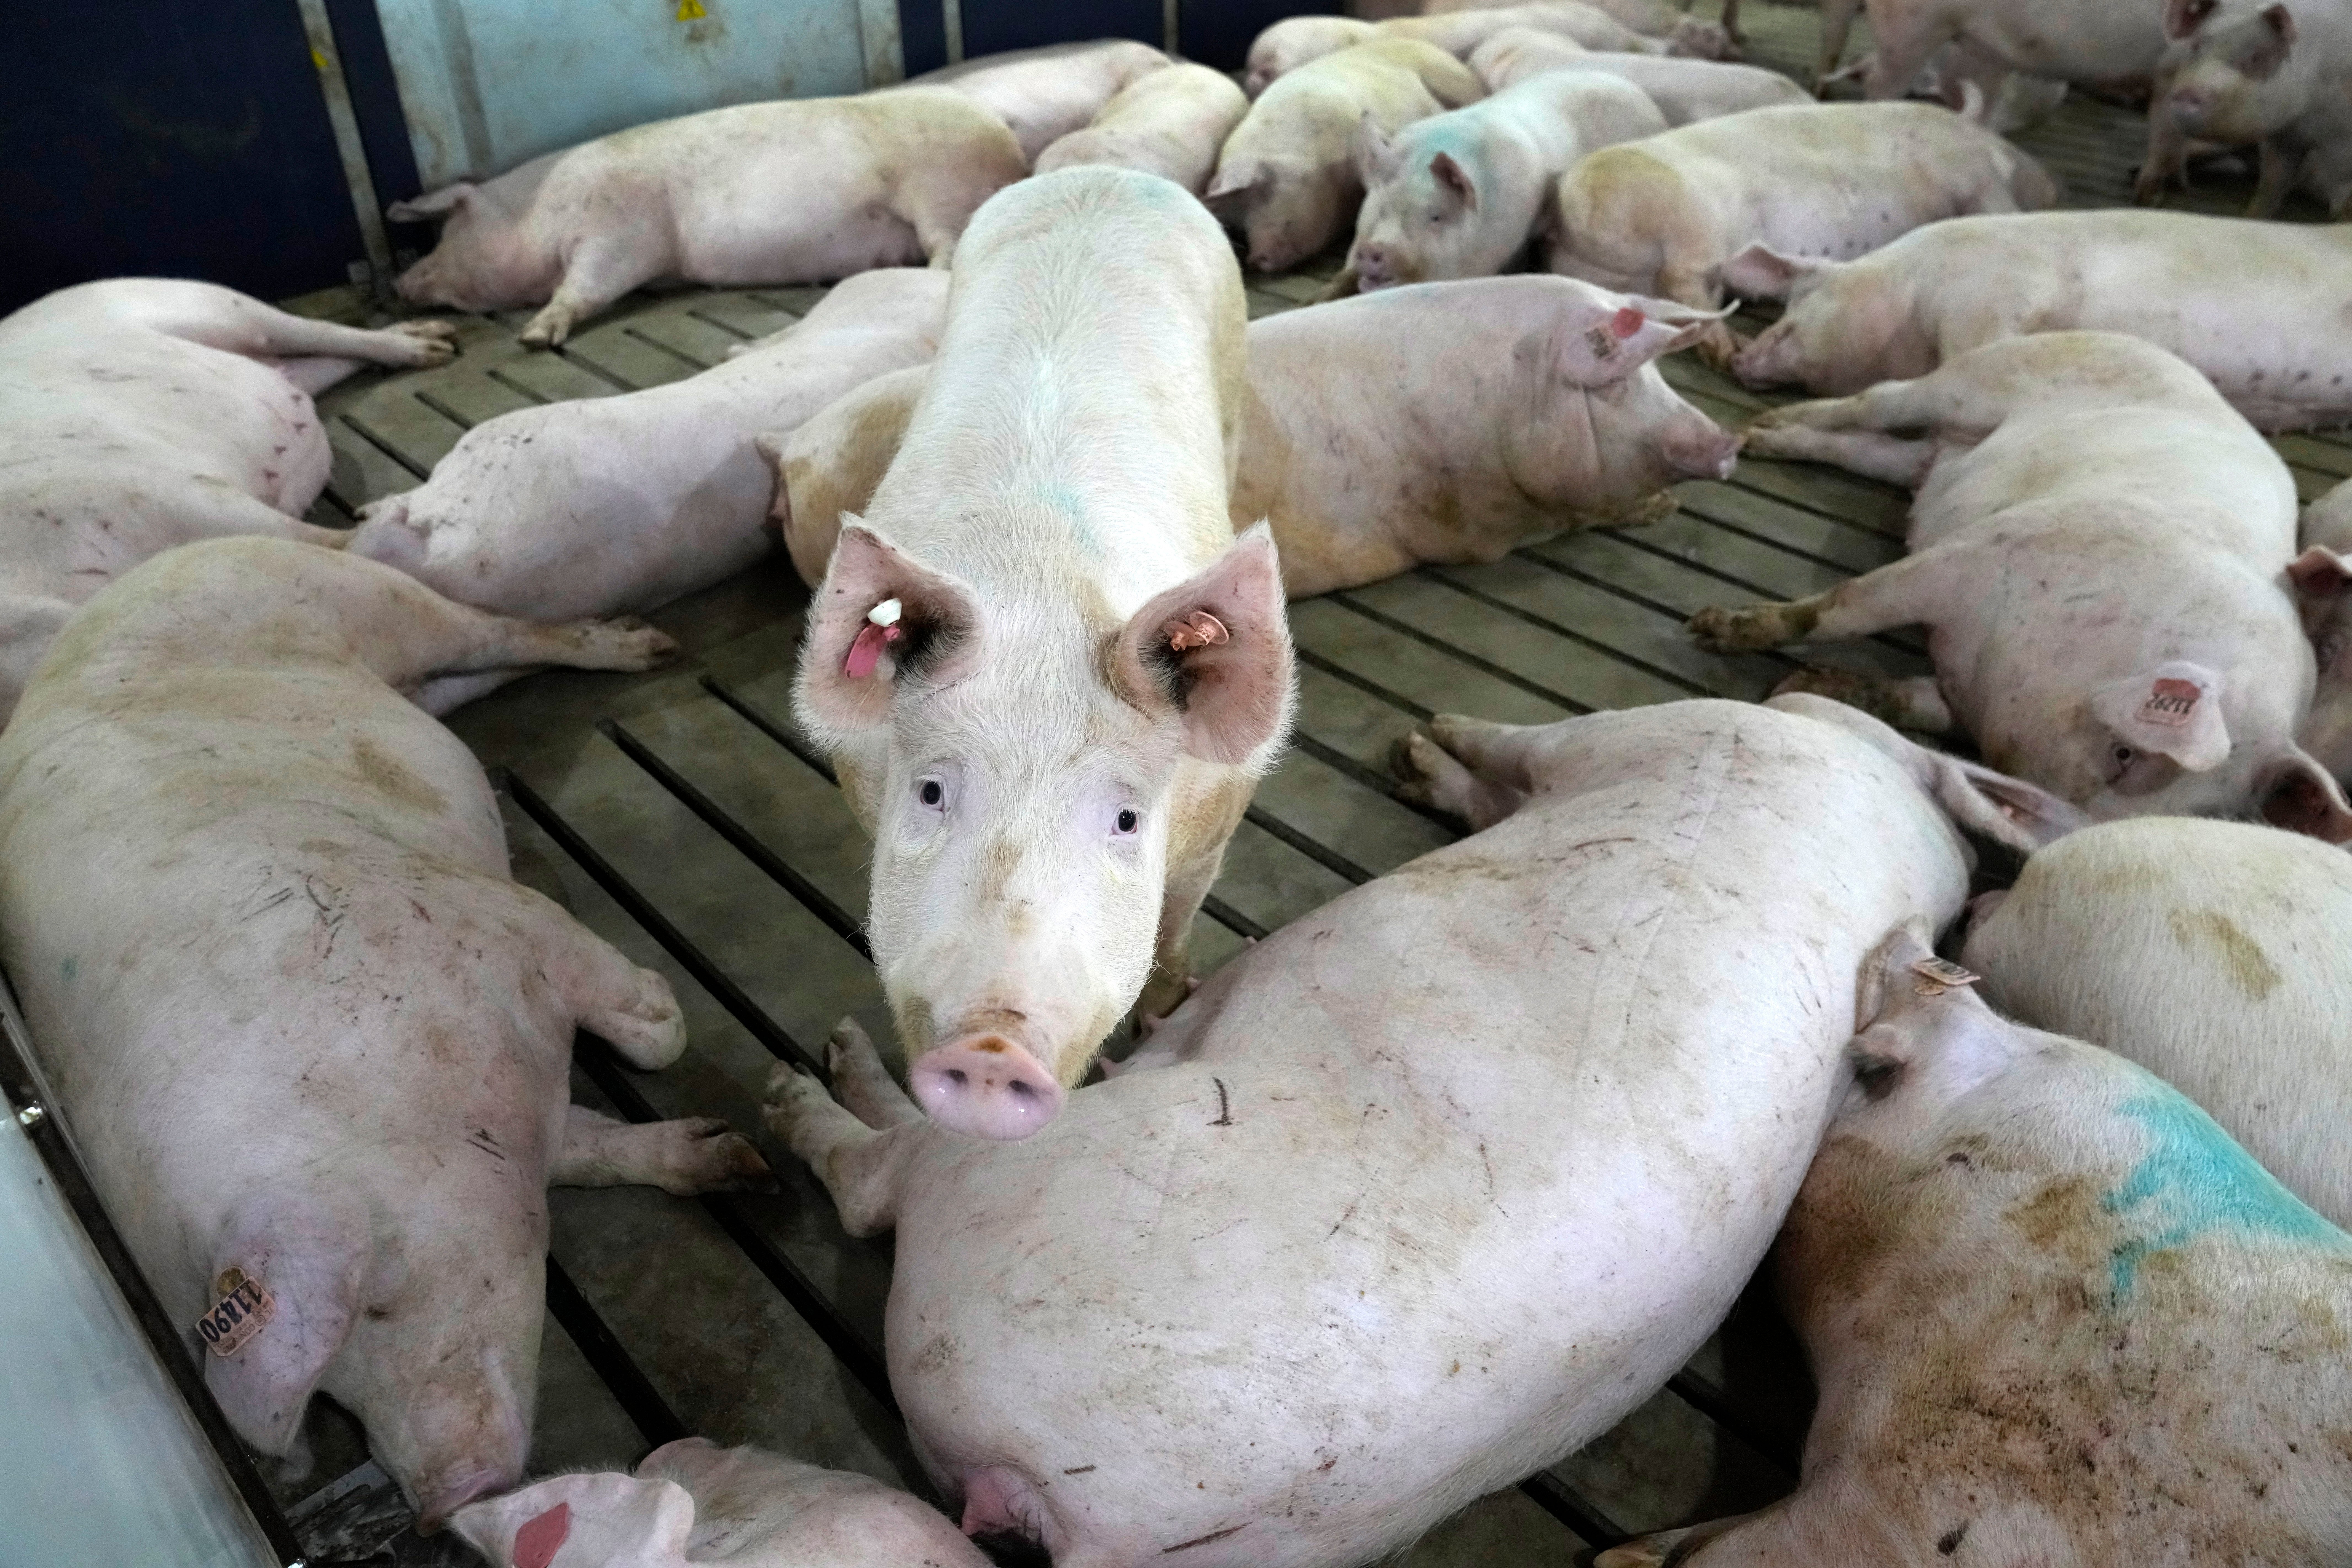 Pigs might one day help fill a shortage of donated organs